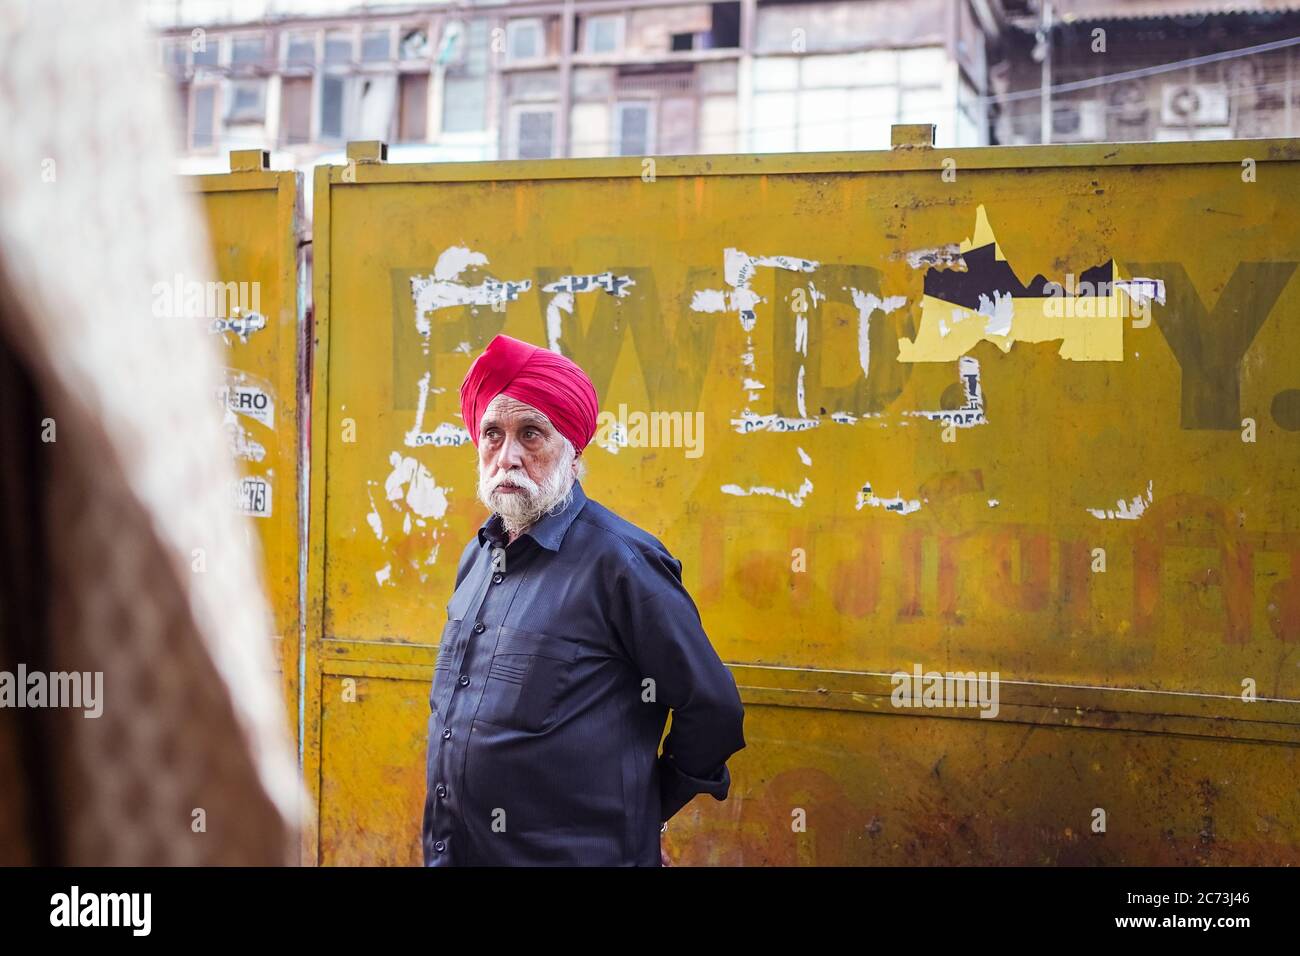 New Delhi / India - February 18, 2020: candid portrait of Sikh Indian old man with white beard in Old Delhi Stock Photo